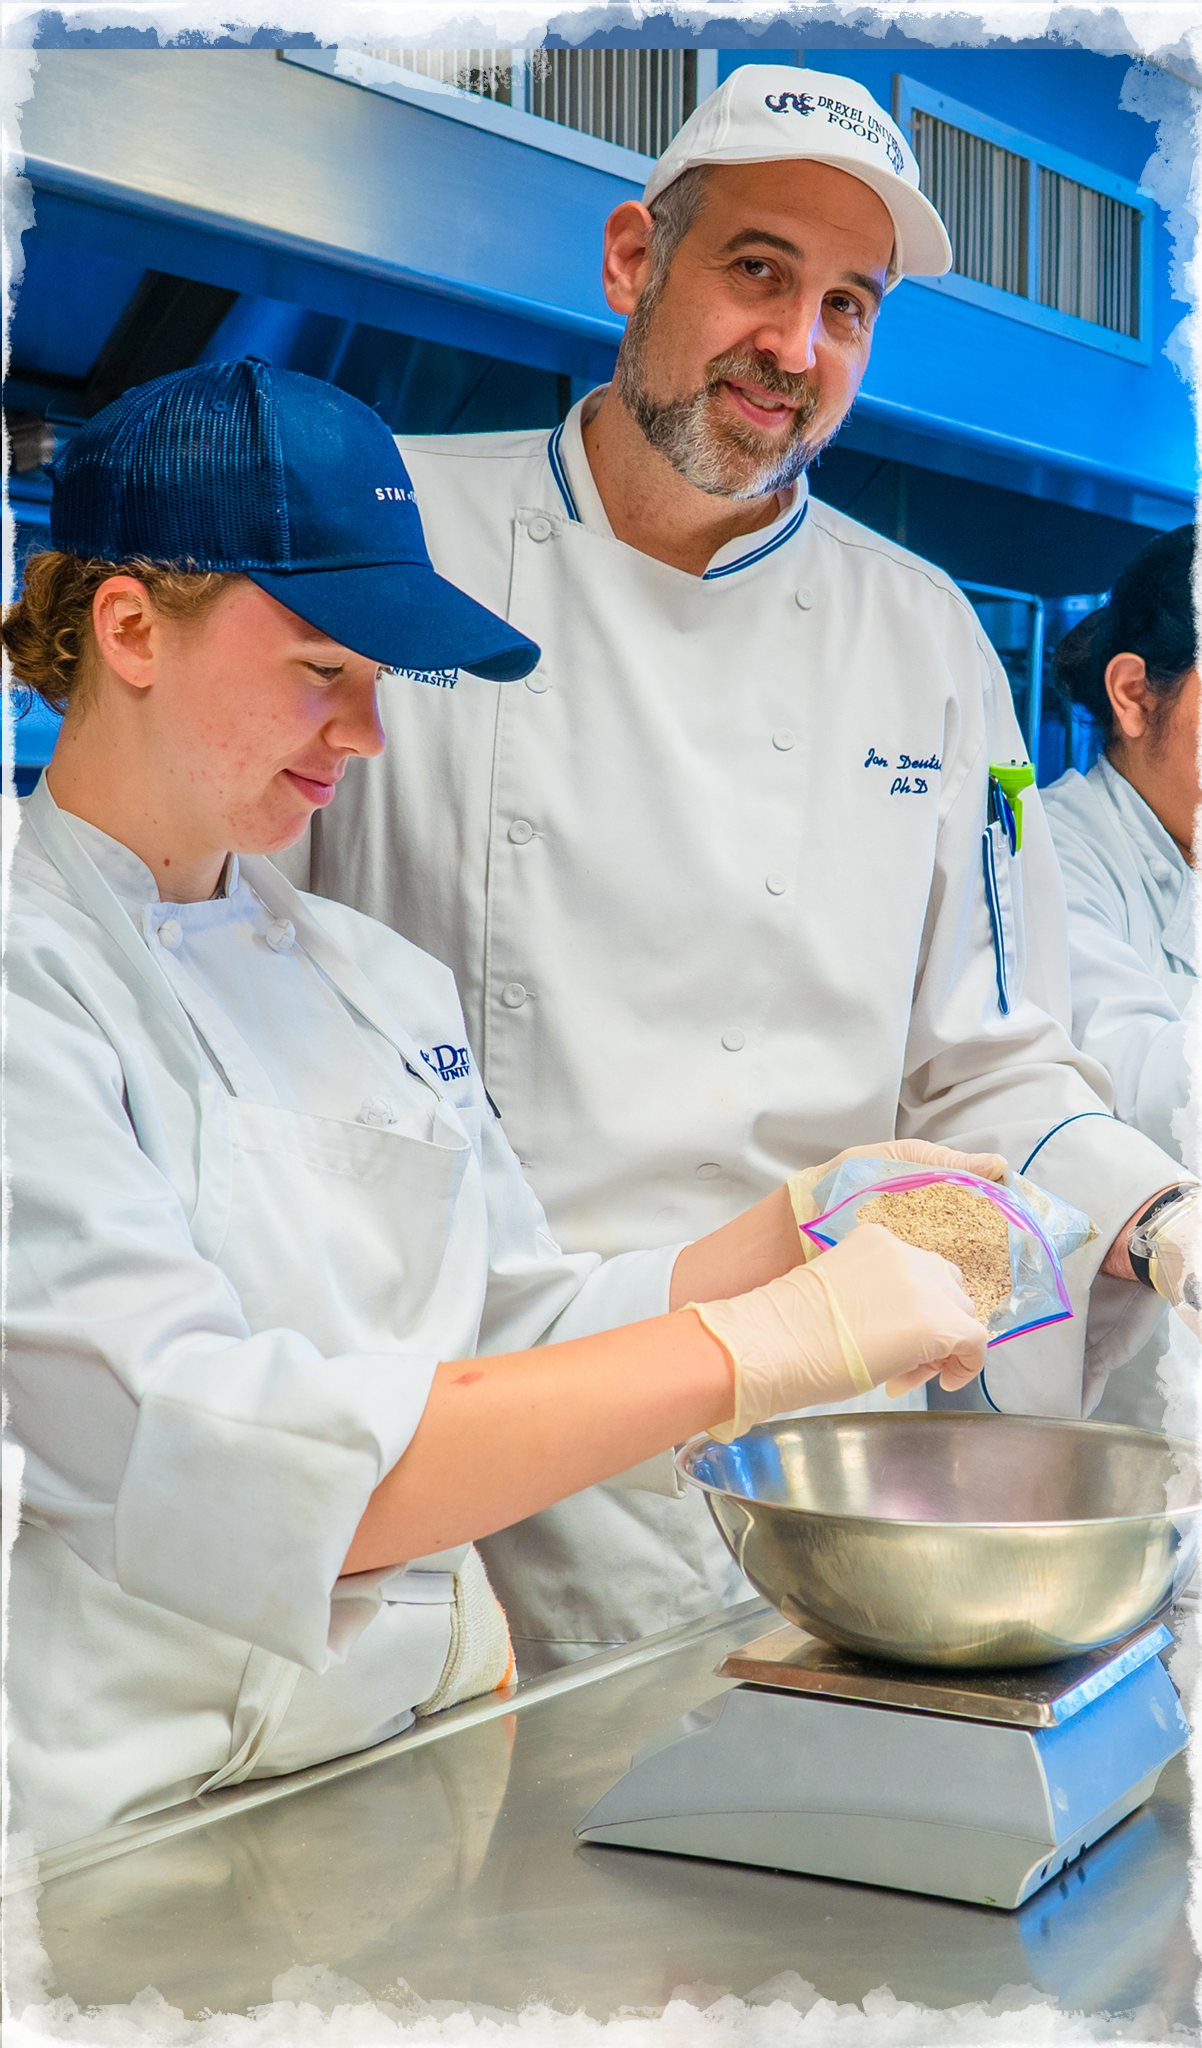 Jonathan Deutsch, PhD, CHE, CRC, working in a kitchen with Drexel University Food and Hospitality Management students.